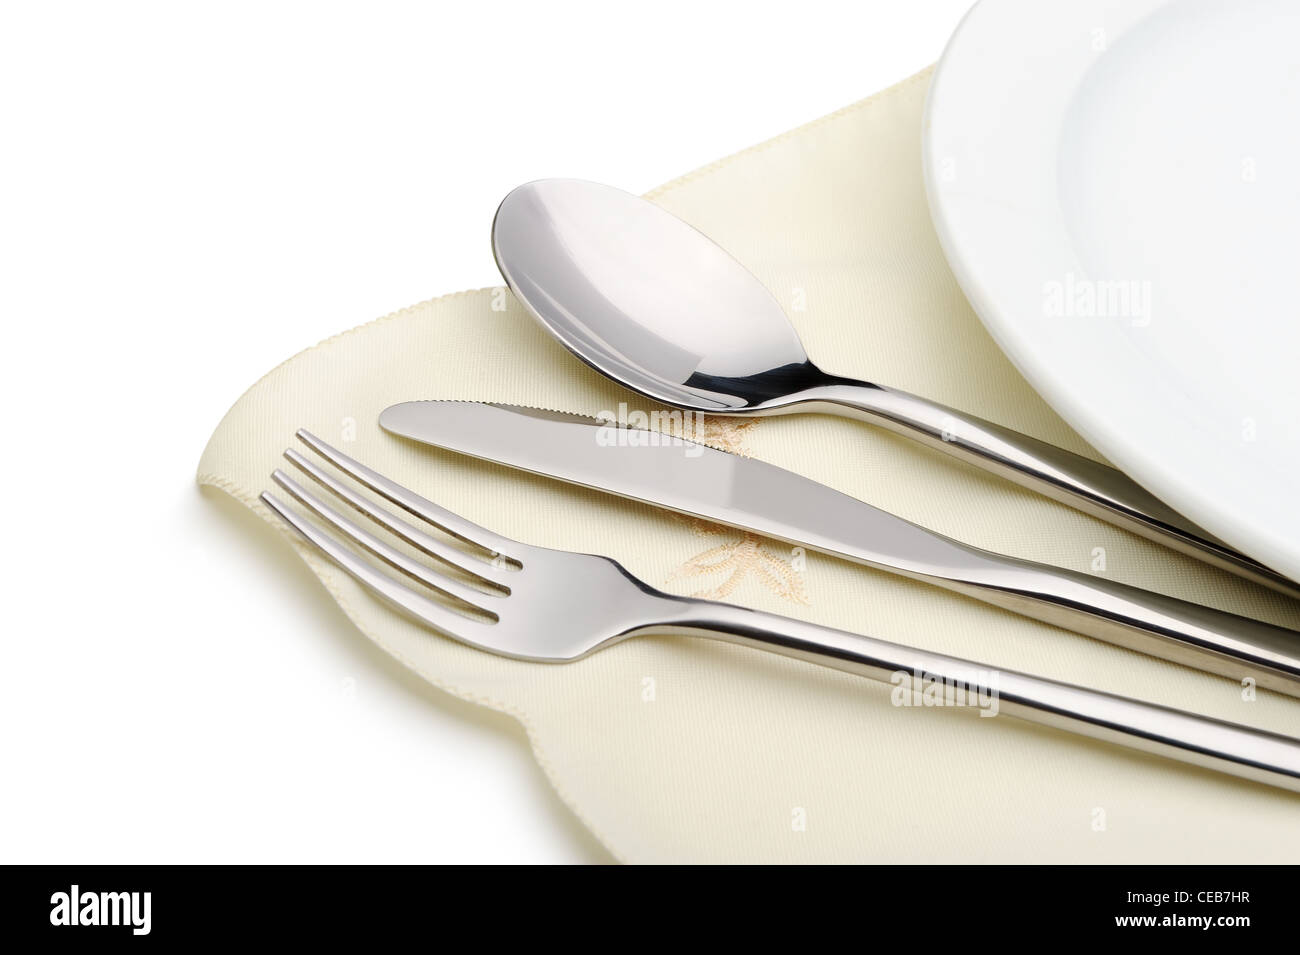 Spoon, fork and a knife lie on serviette. It is isolated on a white background Stock Photo